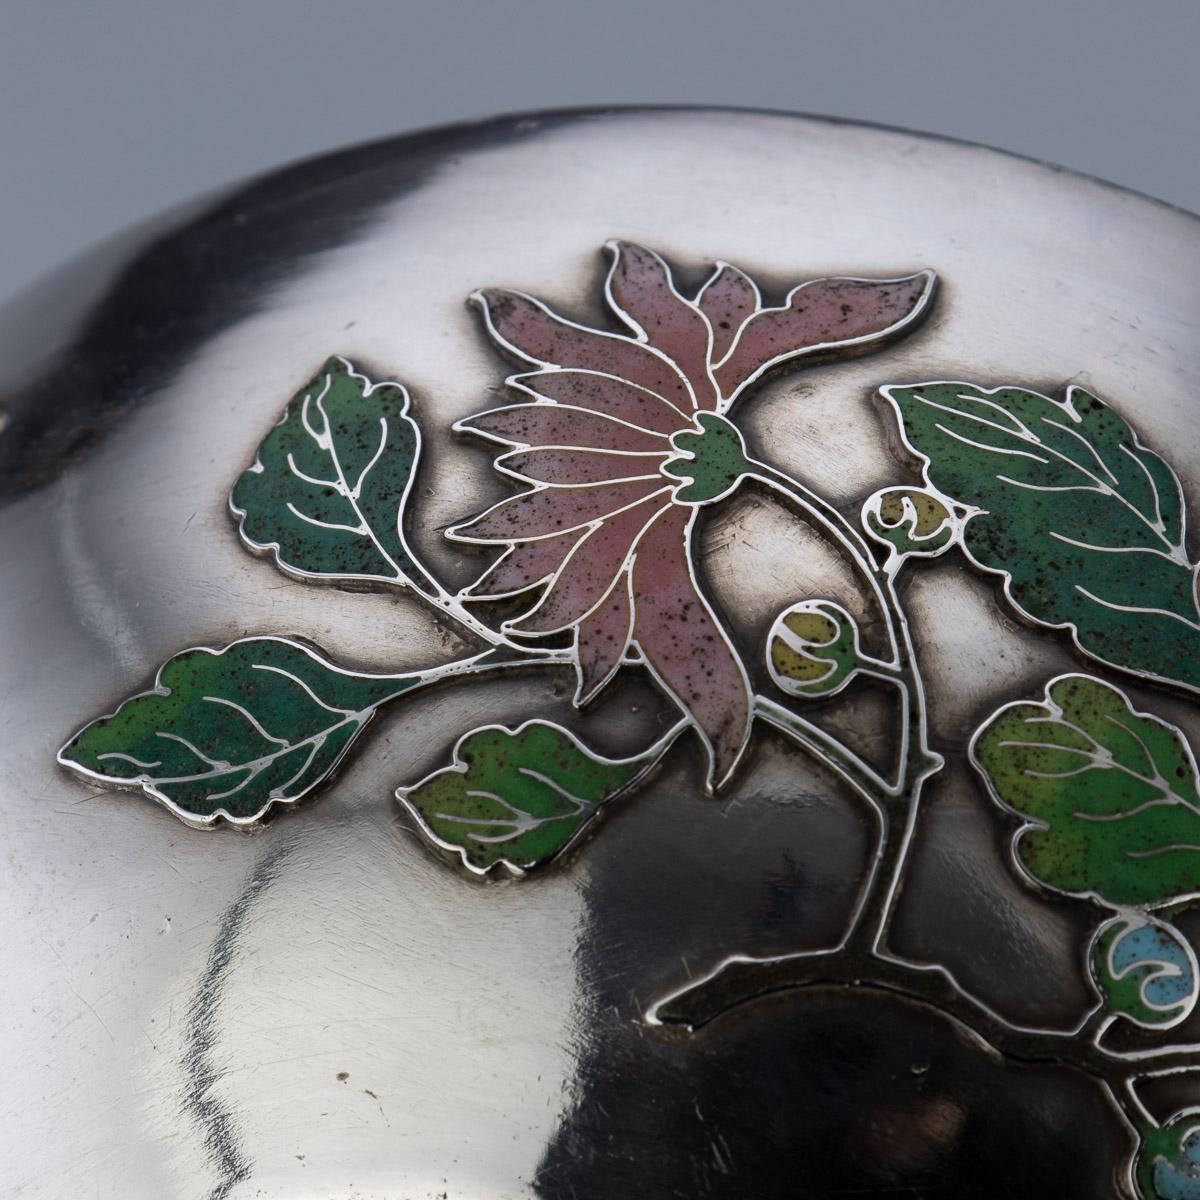 19th Century Rare Chinese Export Solid Silver & Enamel Bowl, Wang Hing, c.1890 For Sale 7